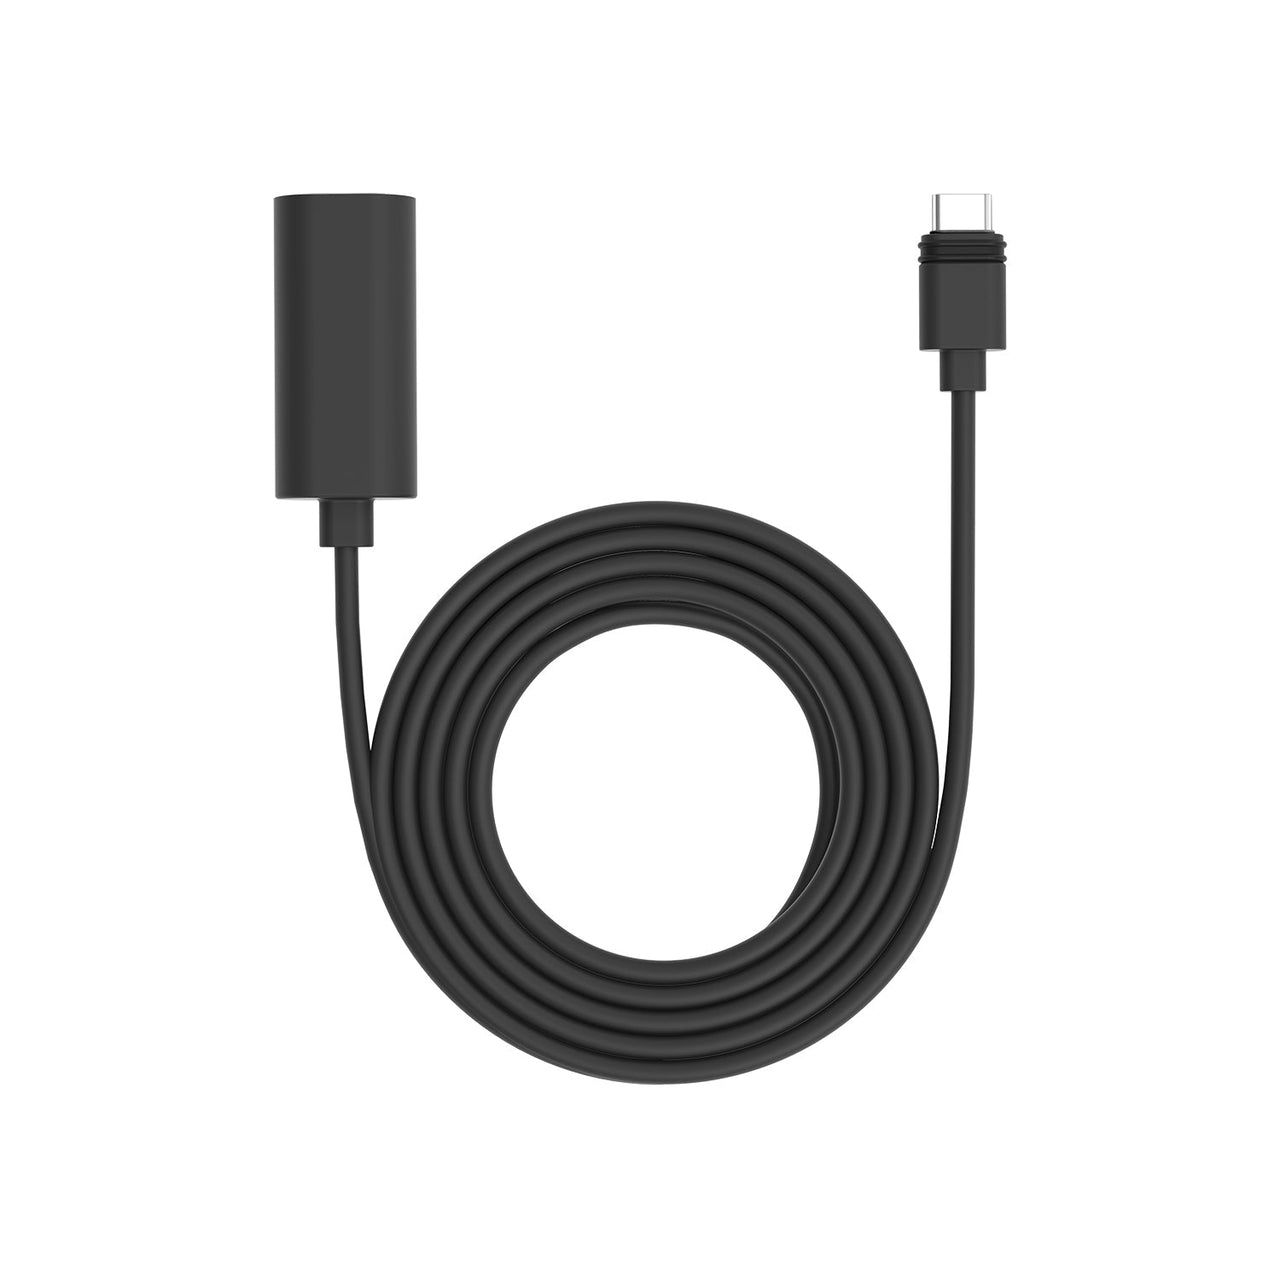 products/ring_10ft_USBC_extension_cable_blk_1500x1500_1_8a5a6bd9-c409-4948-af57-aebf91137f7d.jpg